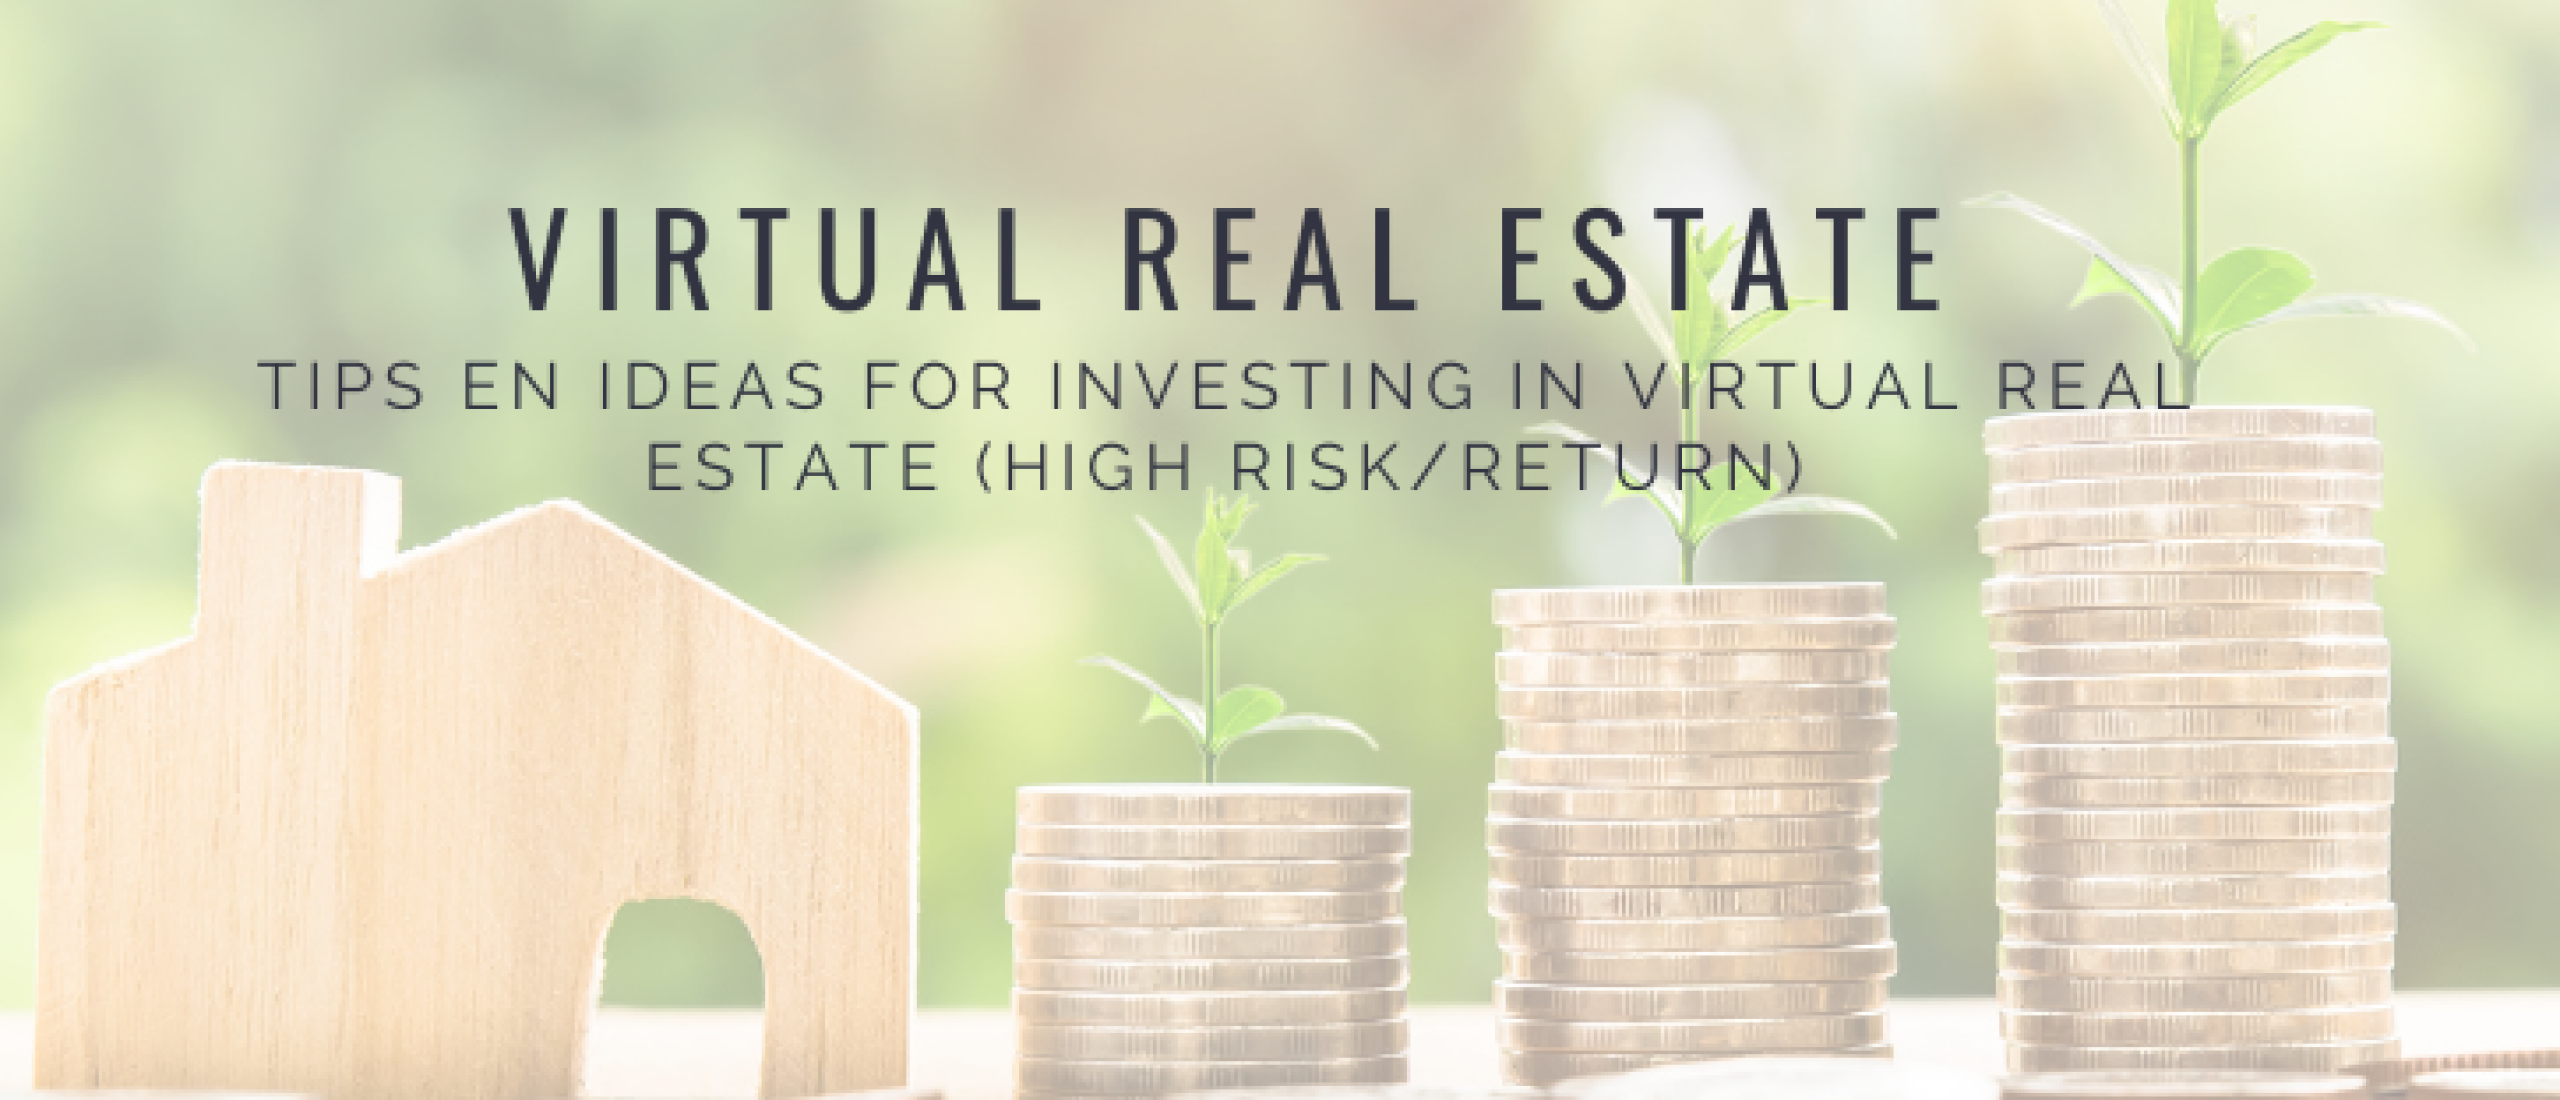 How to Invest in Virtual Real Estate? 5 Ideas and Tips